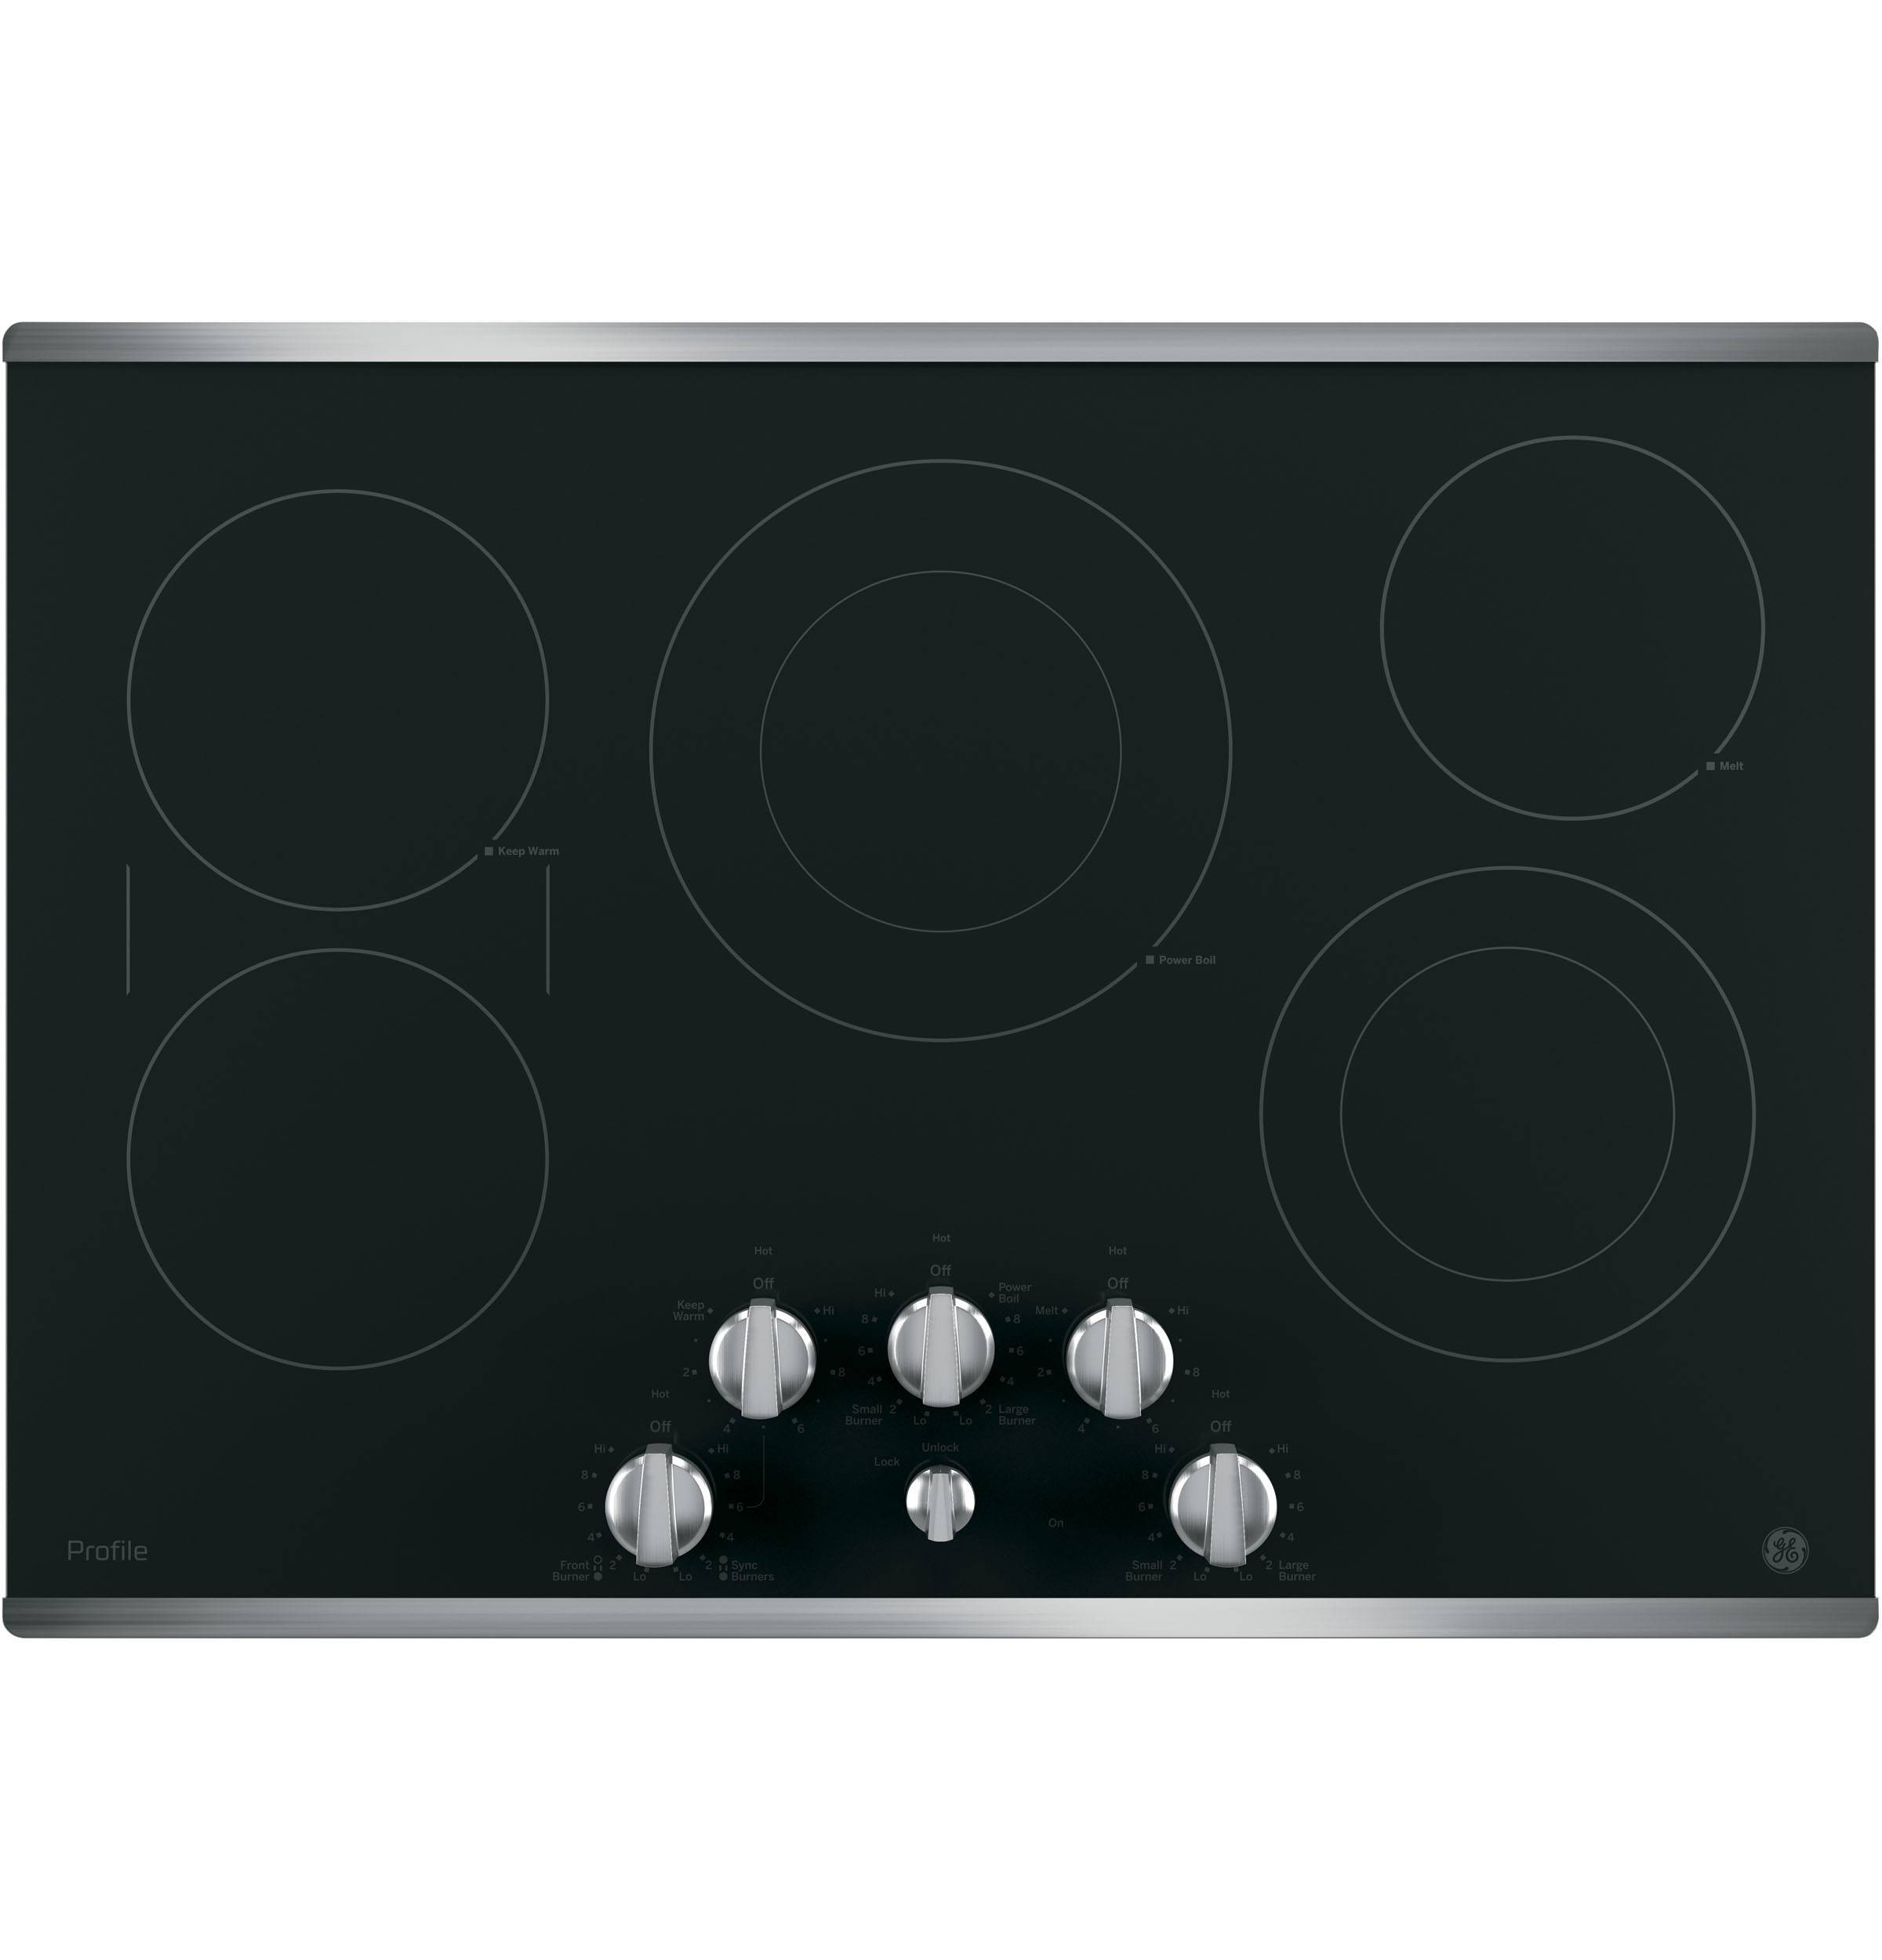 GE Profile™ Series 30" Built-In Knob Control Electric Cooktop (Stainless Steel)